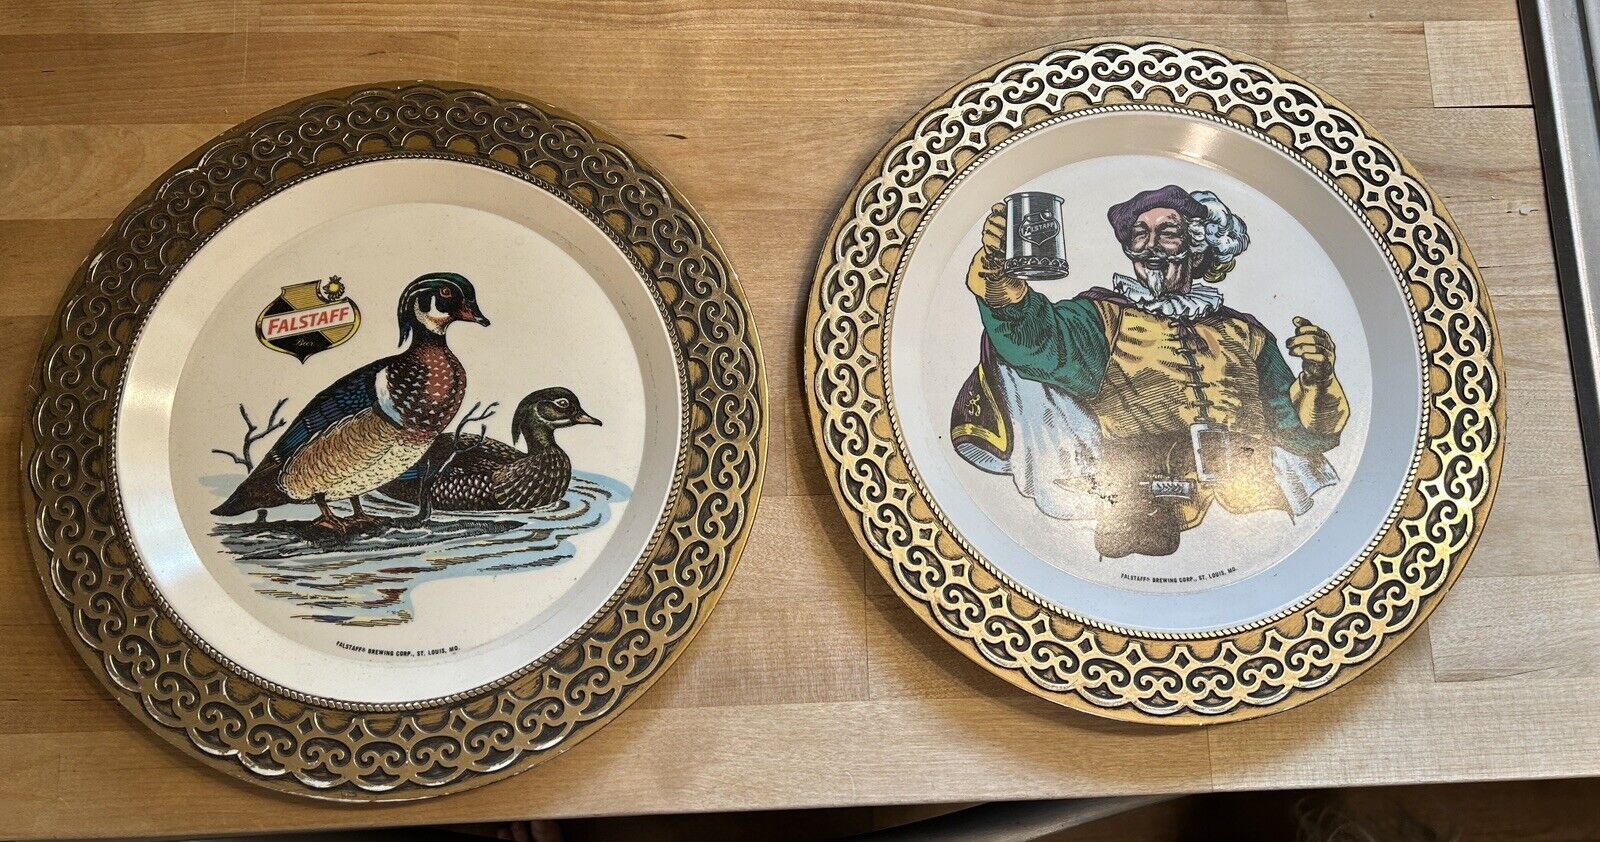 TWO AWESOME FALSTAFF BEER COLLECTOR PLATES ST LOUIS BREWING DUCKS 11” Diameter